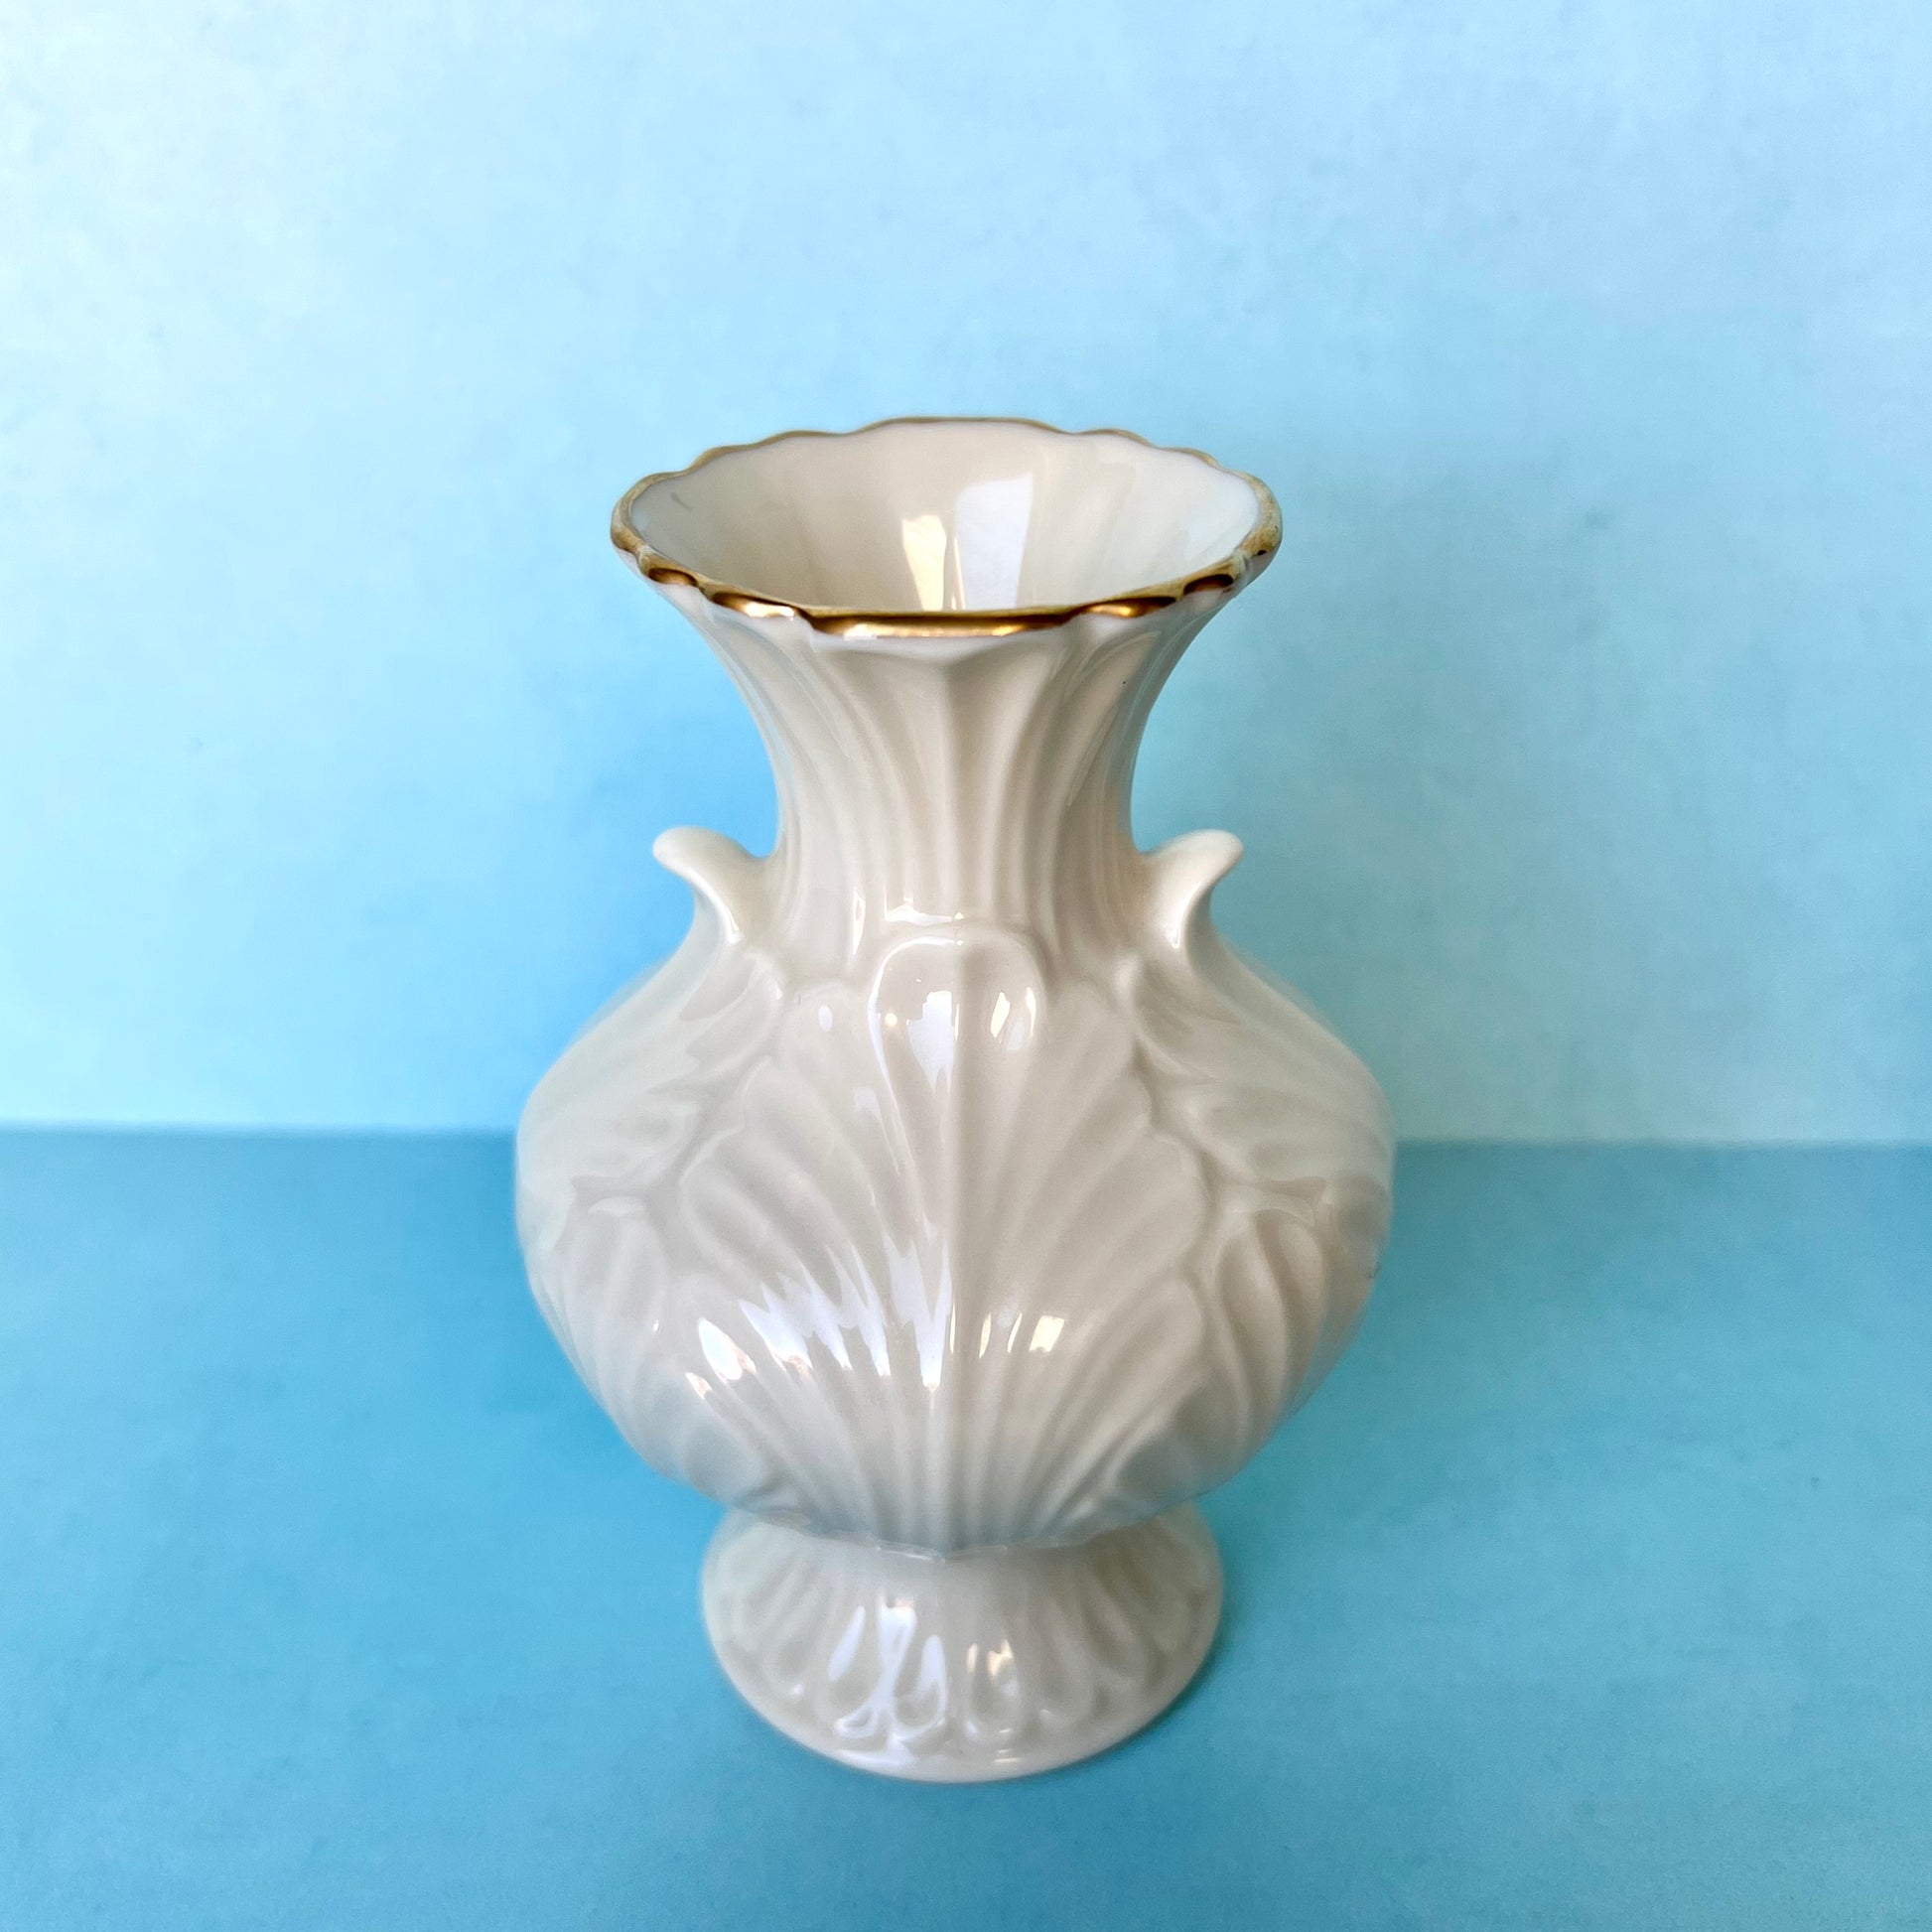 A white bud vase with gold trim against a blue background